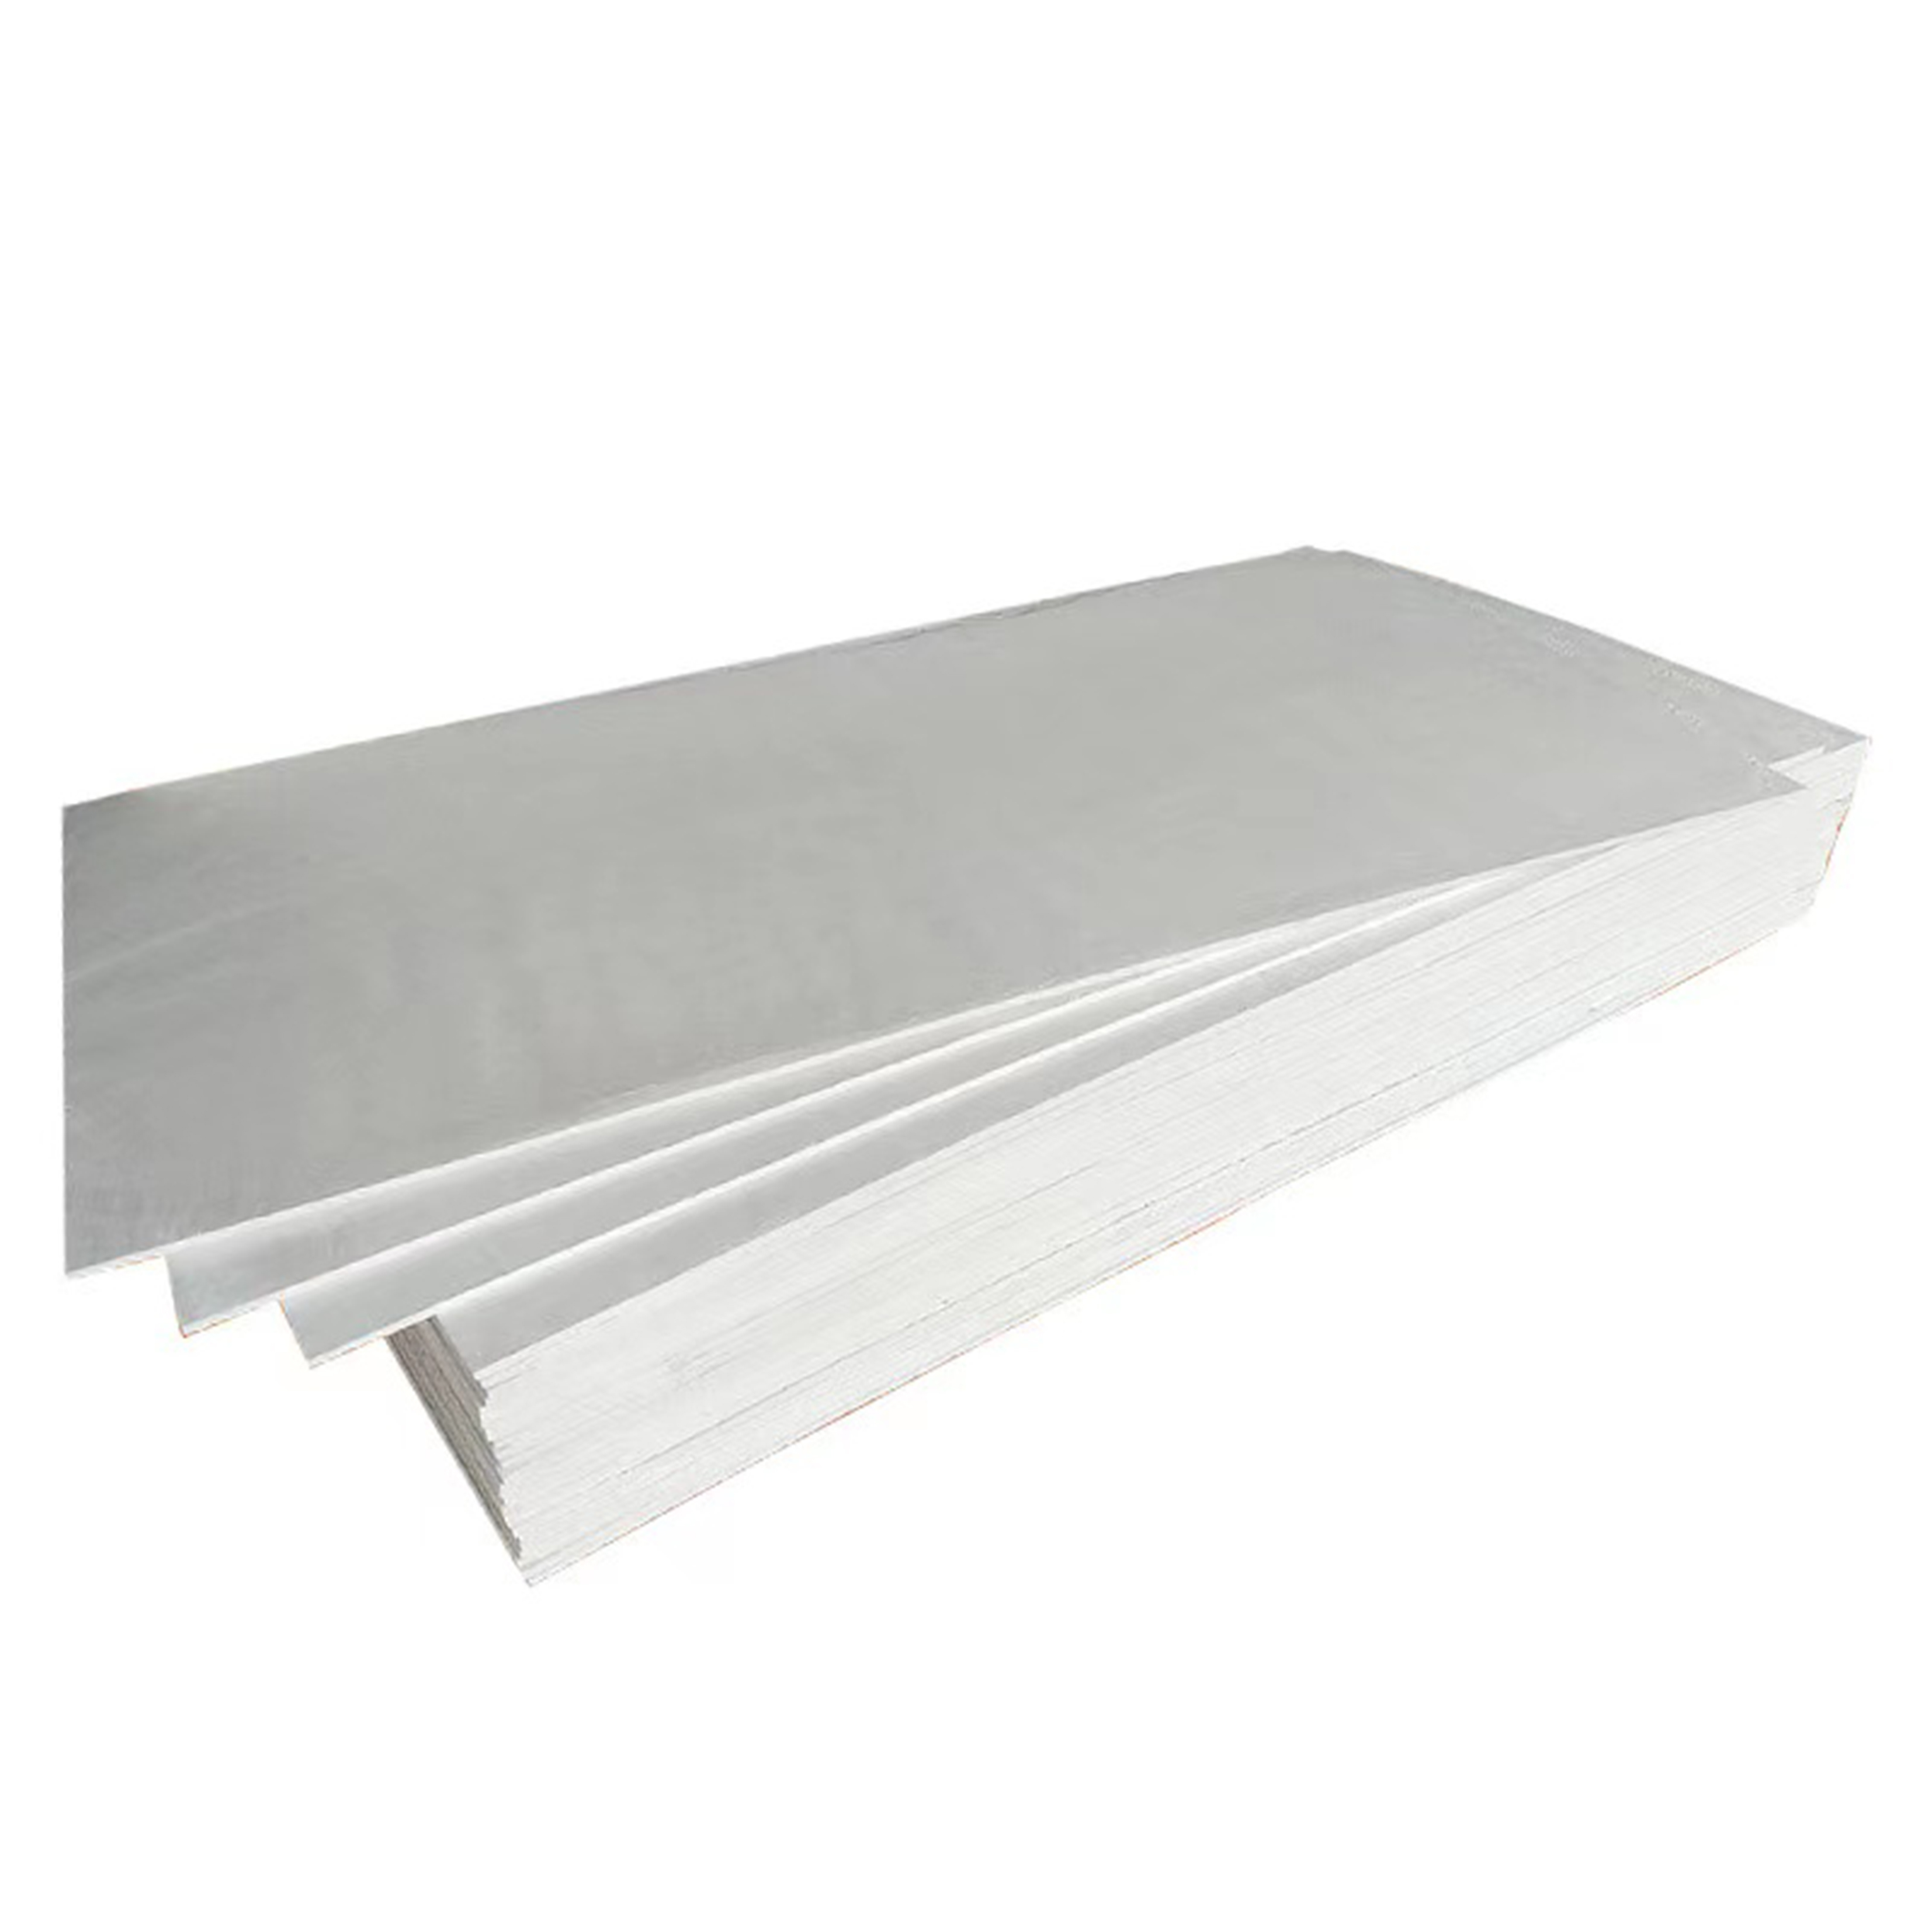 Specializing in the production of environmentally friendly, economical and practical 1000*2000mm fireproof board